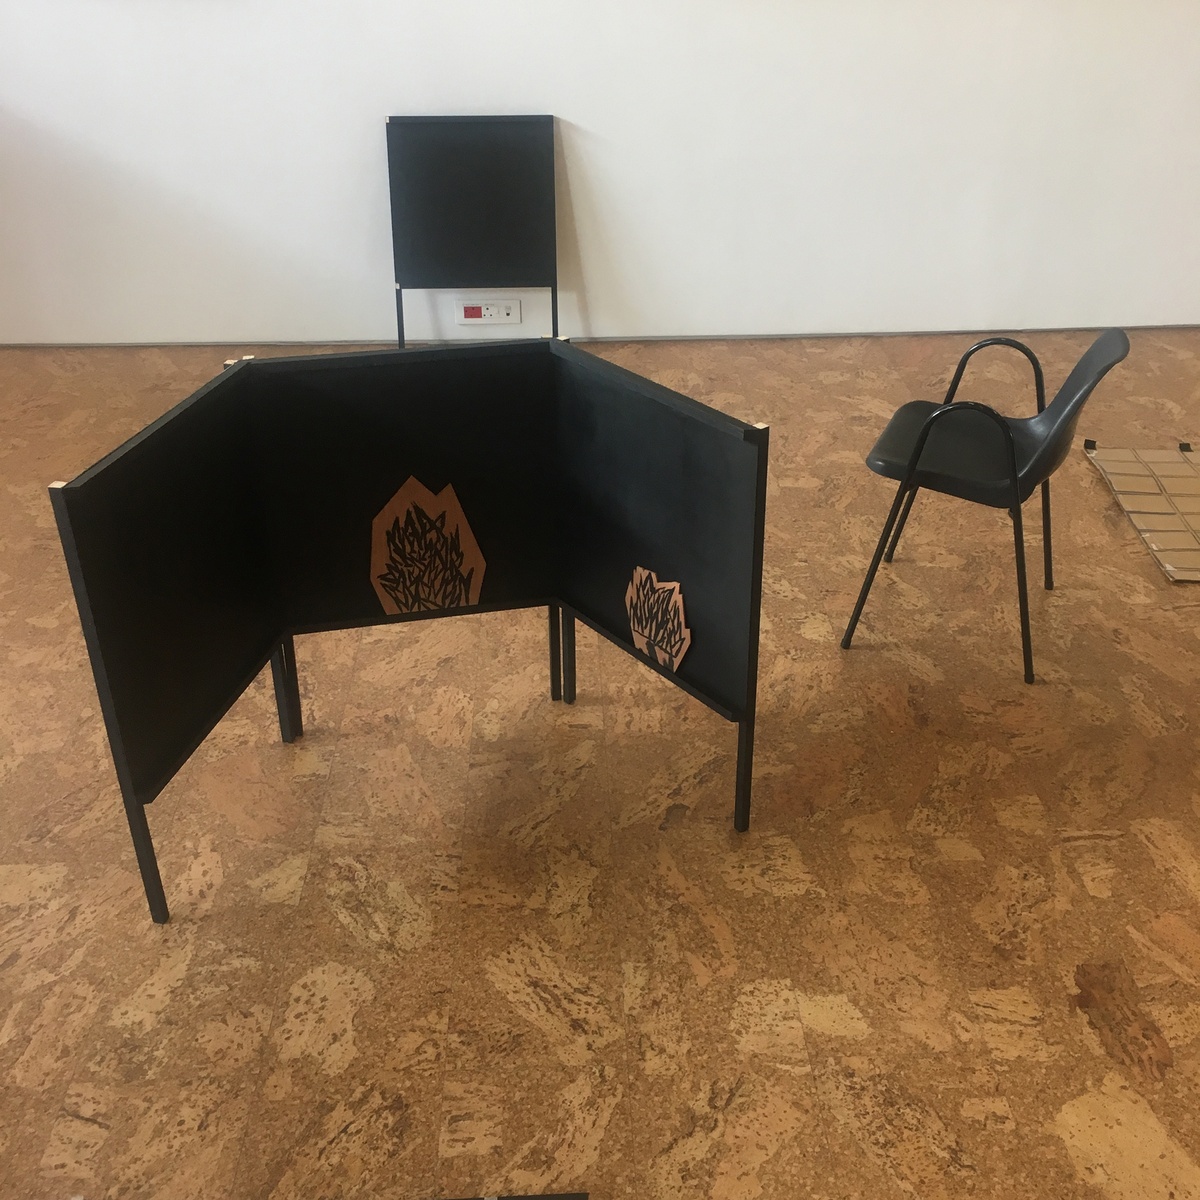 Process photograph from Jonah Sack’s residency on A4’s top floor. A small sculptural object on the floor consists of three small black panels on stands, interlinked to resemble a hearth. The middle and righthand side panels hold small drawings that resemble flames.
